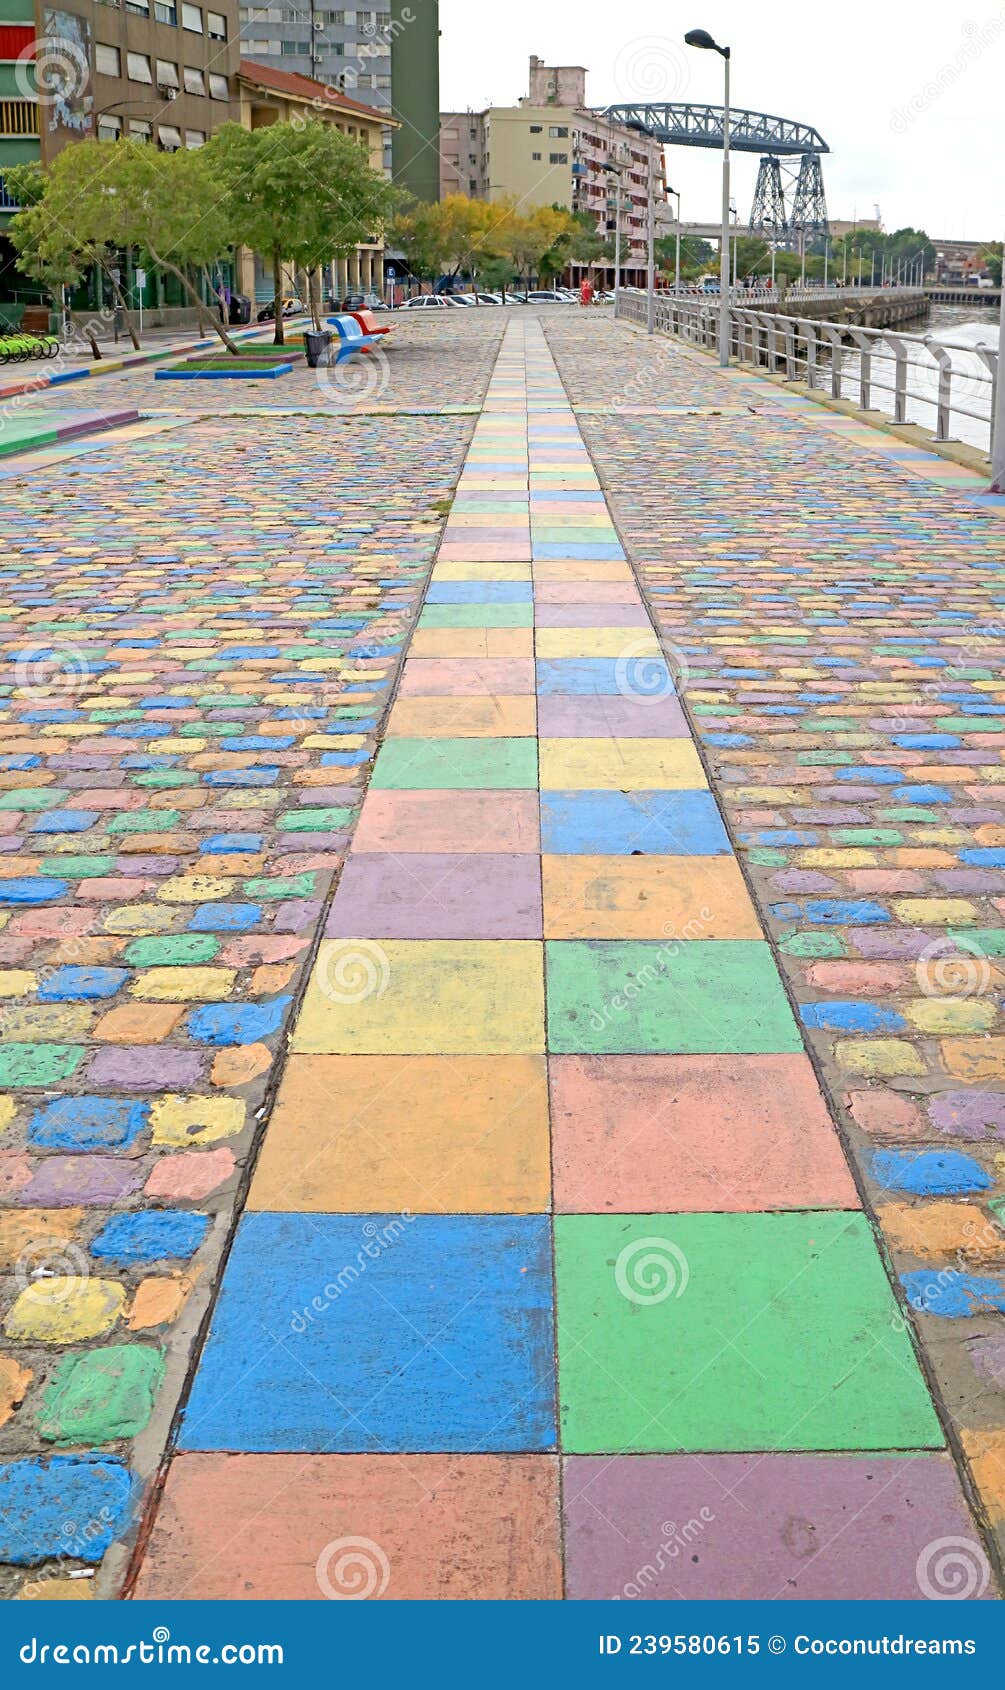 colorful walking path by the riachuelo river with the former buenos aires transporter bridge in backdrop, la boca, buenos aires